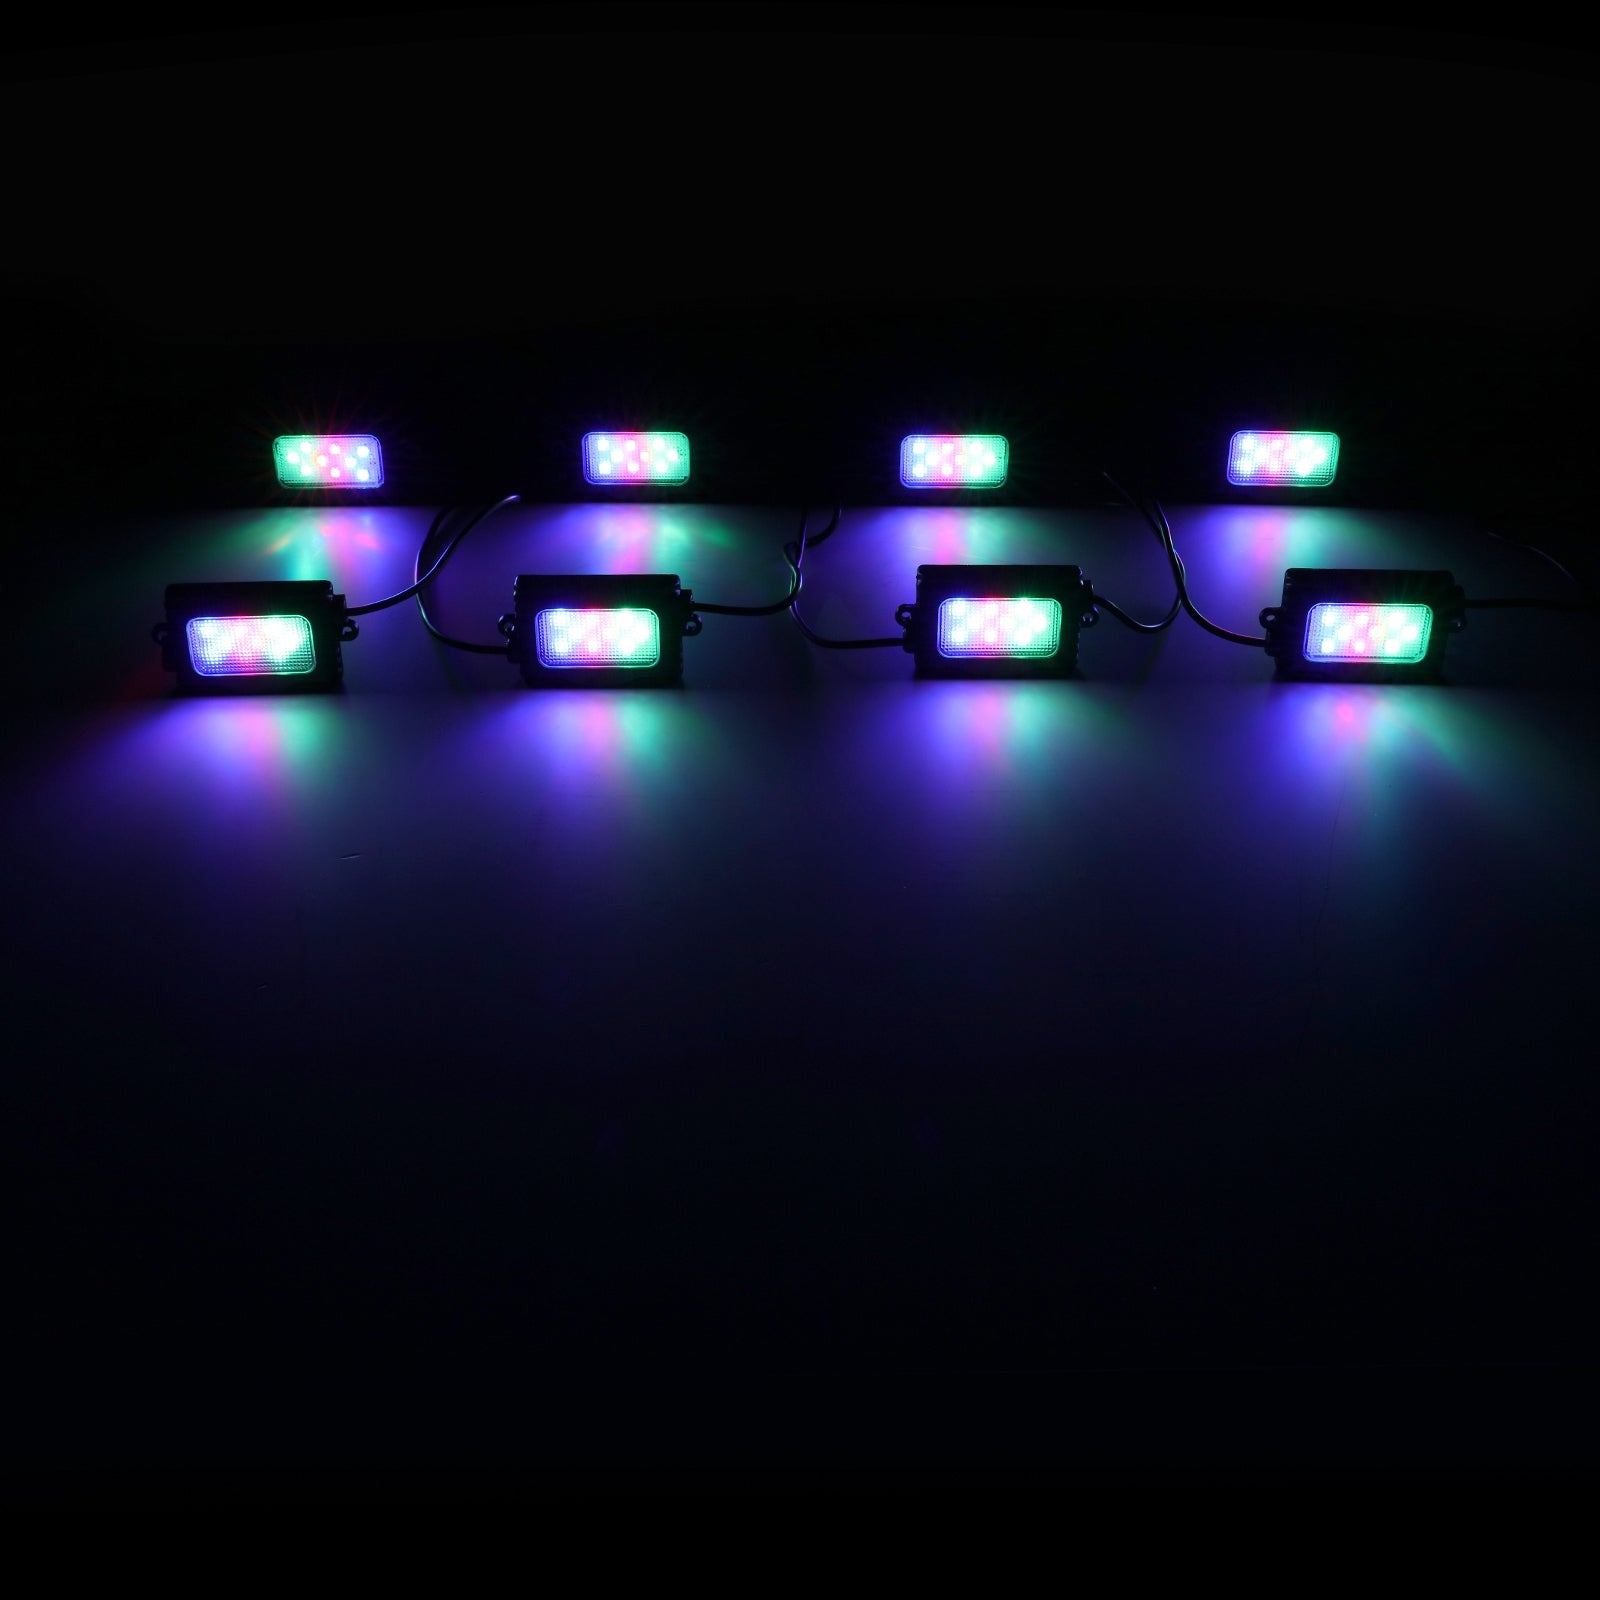 Upgraded Version! Magic Dream Color RGB LED Rock Lights Kit with Bluetooth APP Control, Multicolor Chasing Neon Underglow Lights